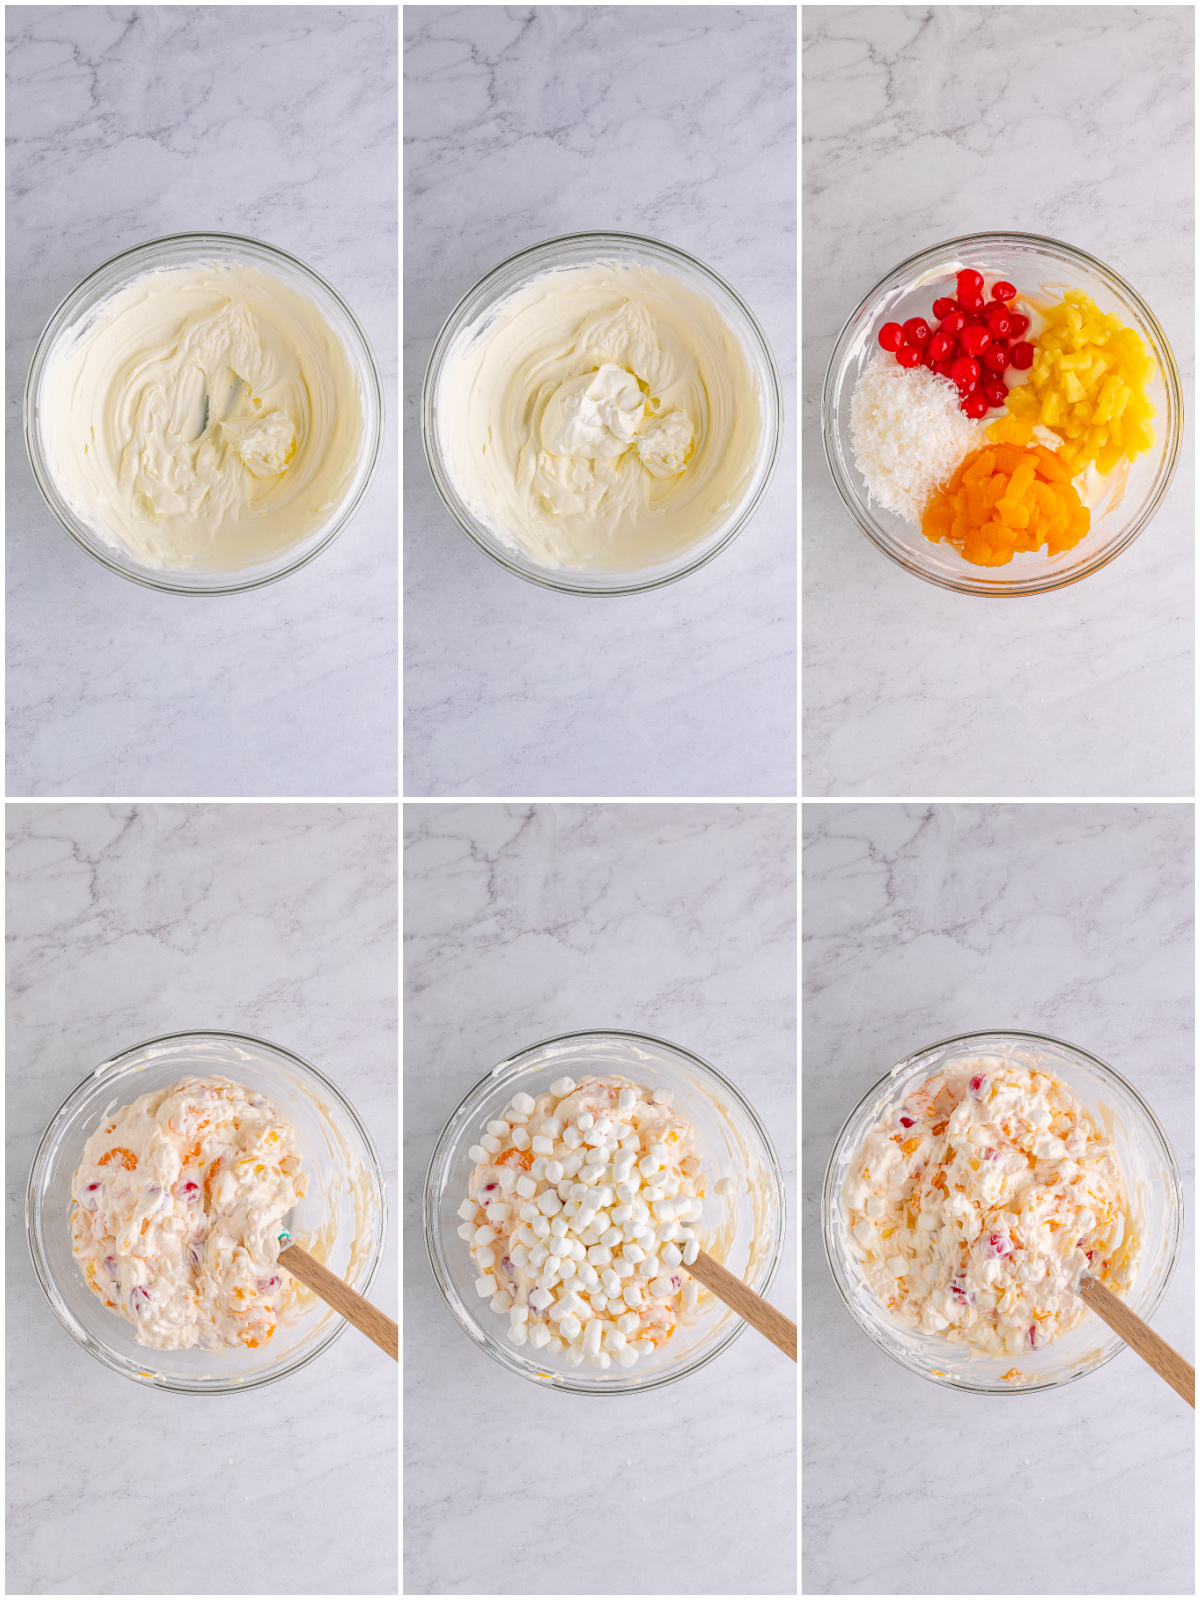 Step by step photos on how to make an Ambrosia Salad Recipe.